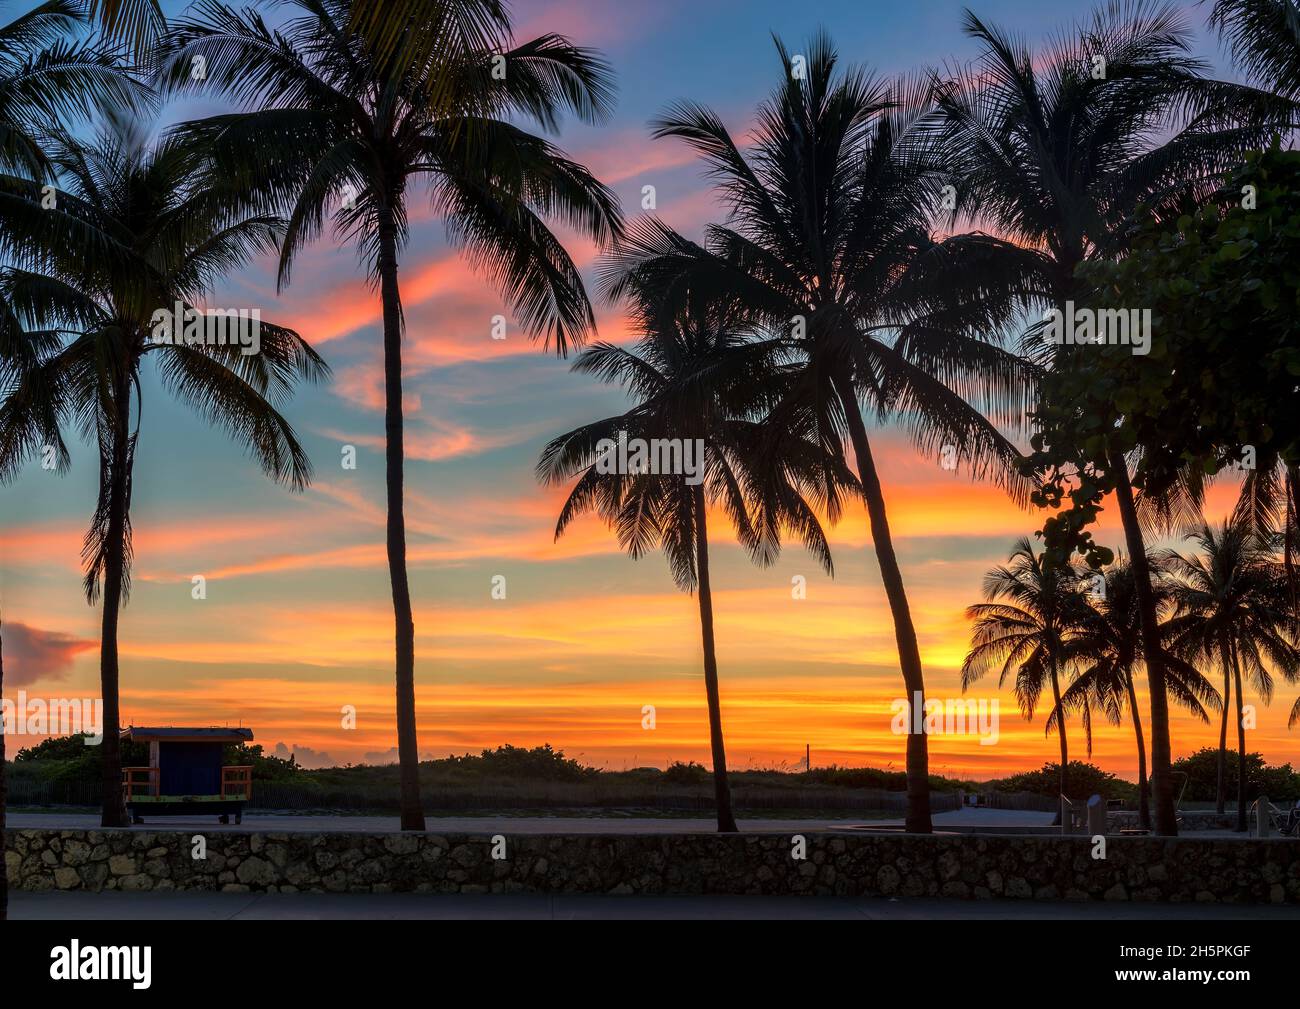 Palm trees at Sunset in California beach, Los Angeles, California, Stock Photo